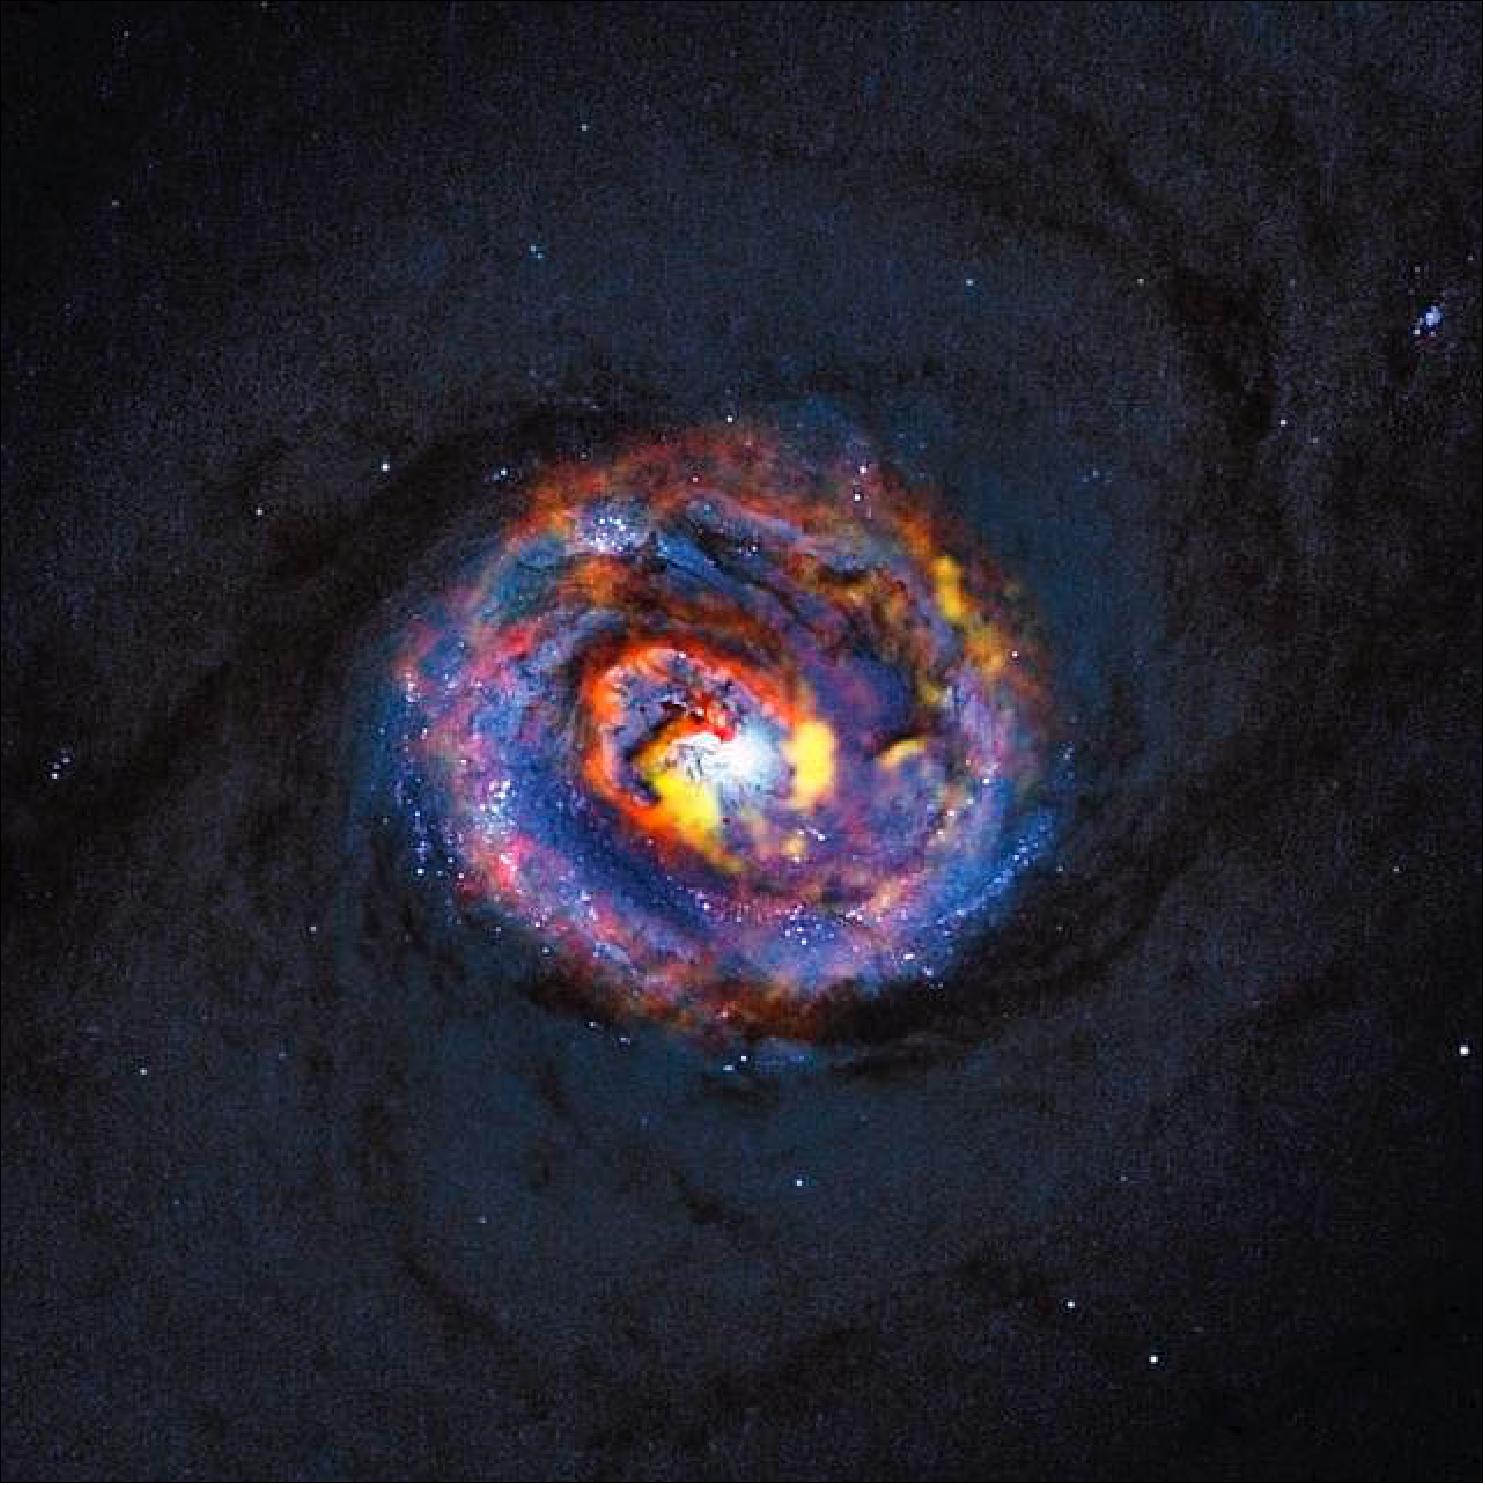 Figure 60: Composite view of the galaxy NGC 1433 from ALMA and Hubble. This detailed view shows the central parts of the nearby active galaxy NGC 1433. The dim blue background image, showing the central dust lanes of this galaxy, comes from the NASA/ESA Hubble Space Telescope. The colored structures near the center are from recent ALMA observations that have revealed a spiral shape, as well as an unexpected outflow, for the first time (image credit: ALMA, ESO/NAOJ/NRAO)/NASA/ESA, F. Combes)